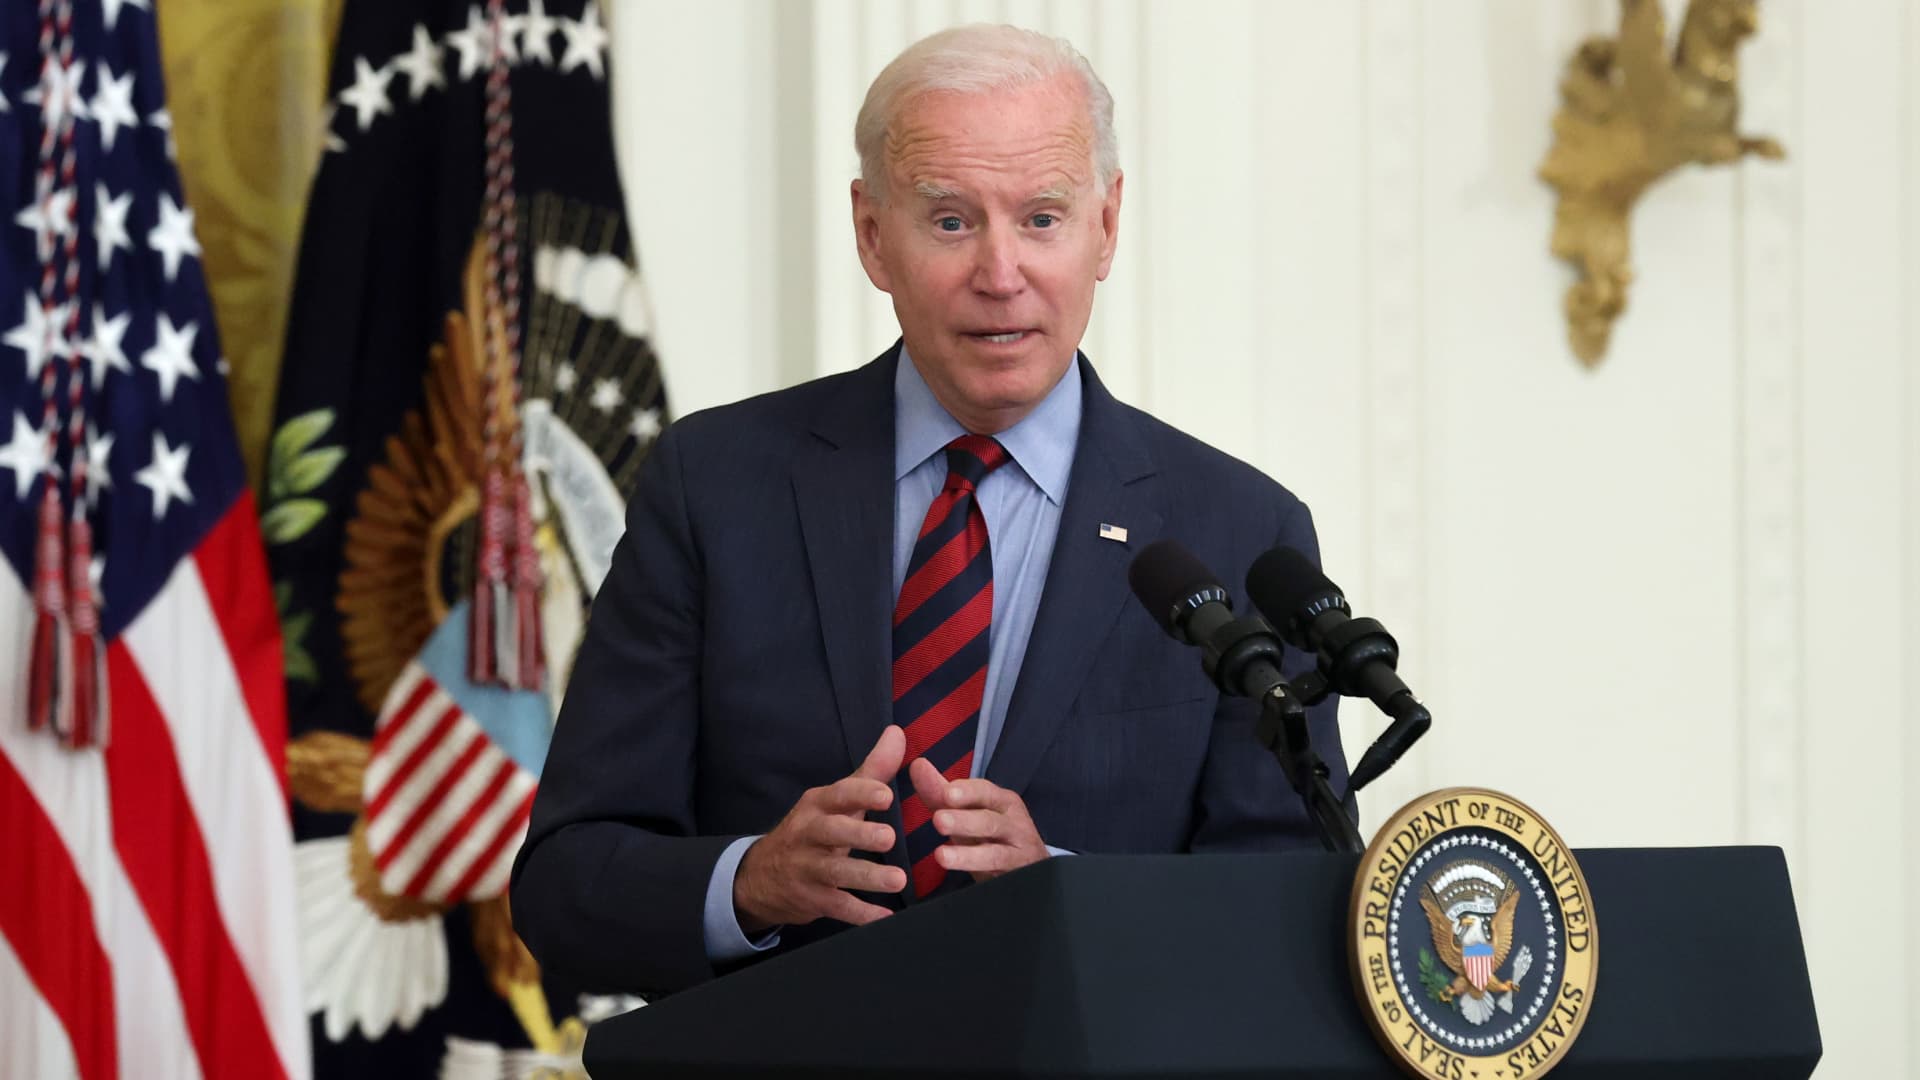 U.S. President Joe Biden delivers remarks at the White House in Washington, August 3, 2021.